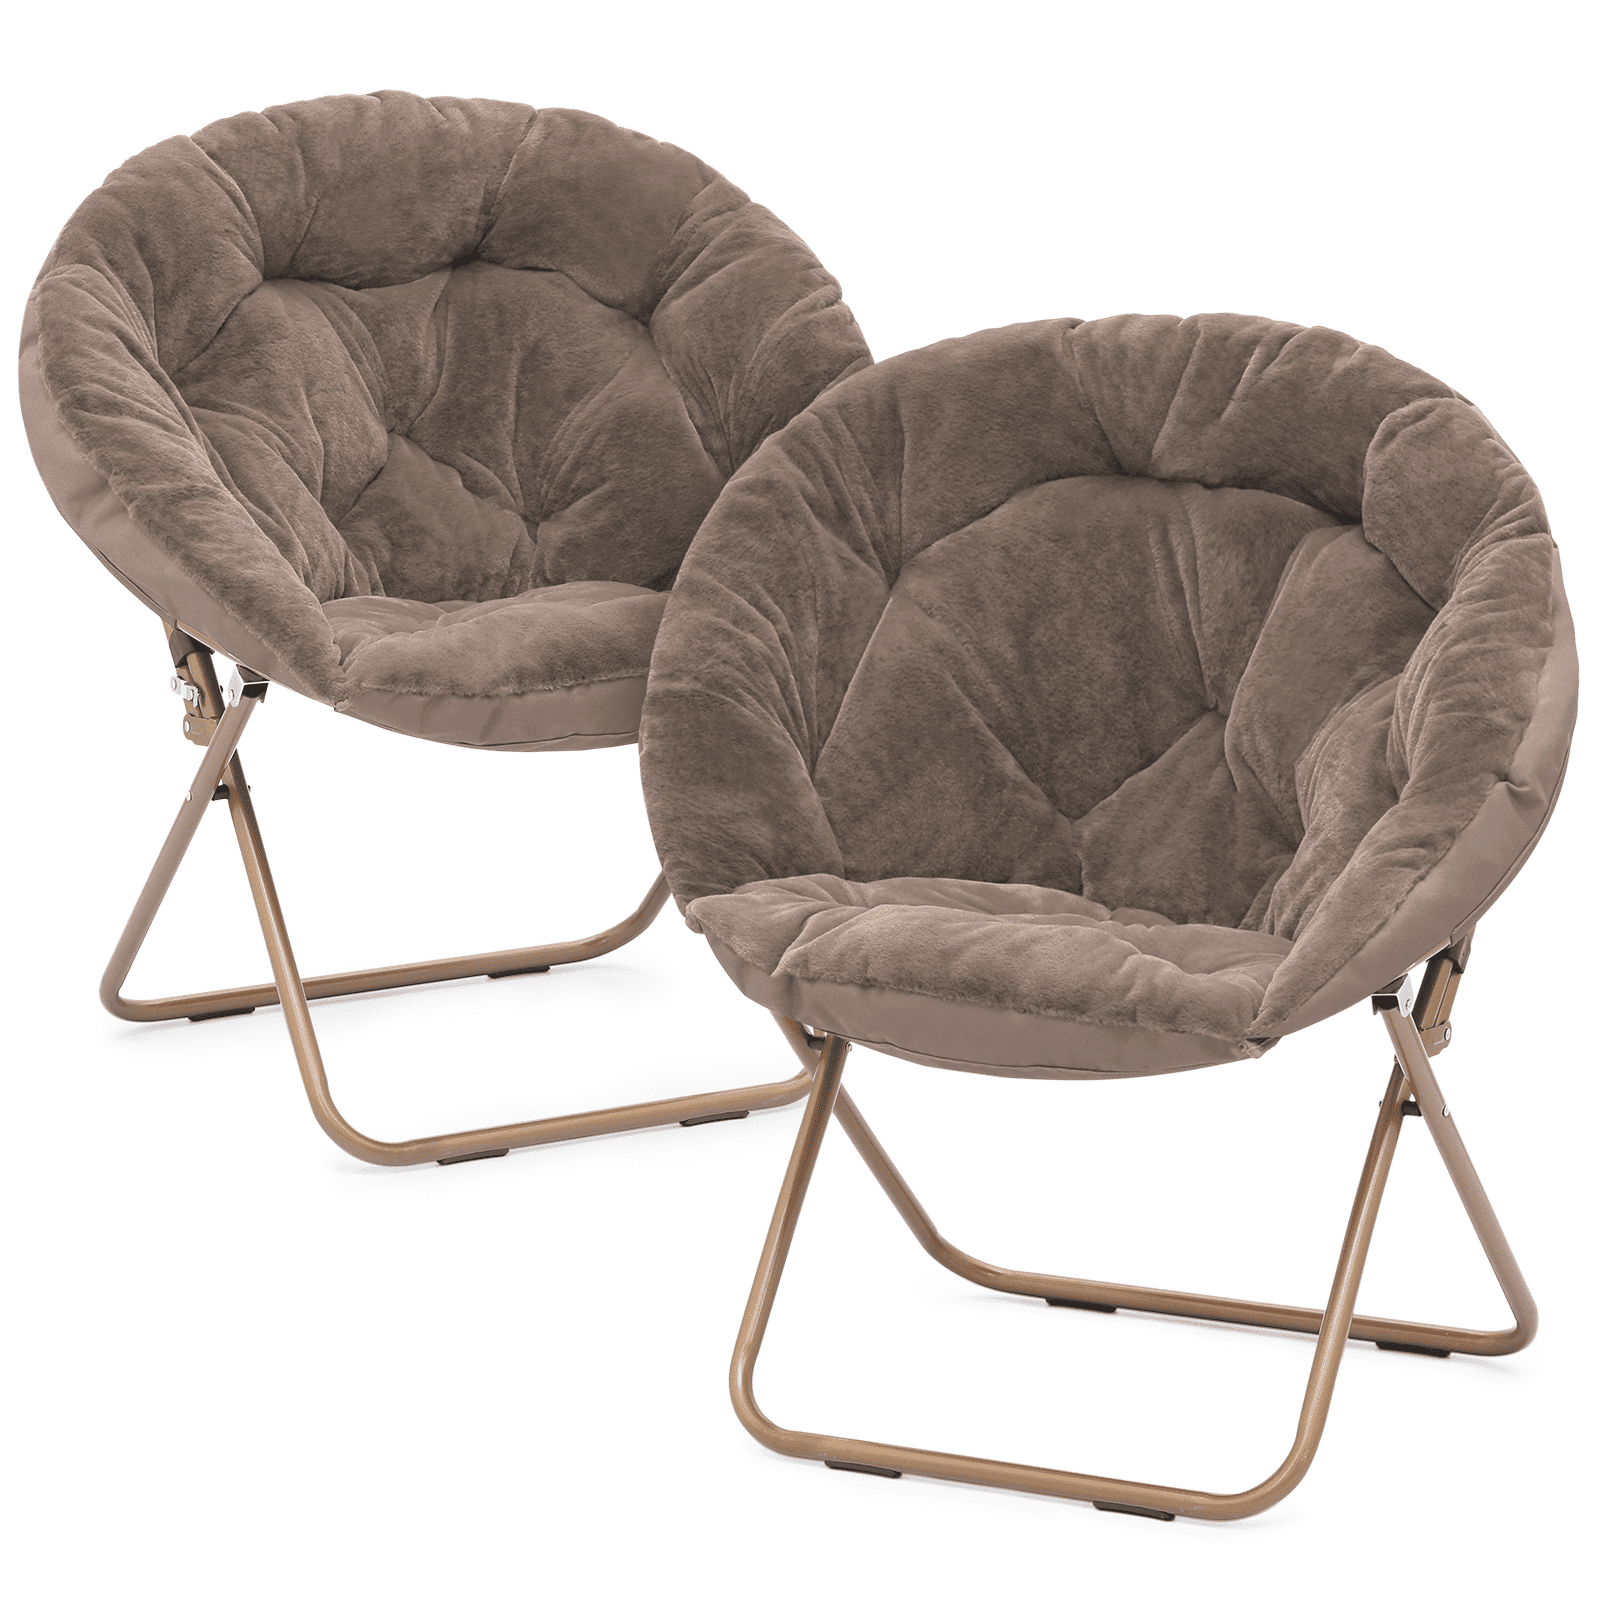 Magshion Set of 2 Comfy Saucer Chair, Foldable Faux Fur Lounge Chair ...